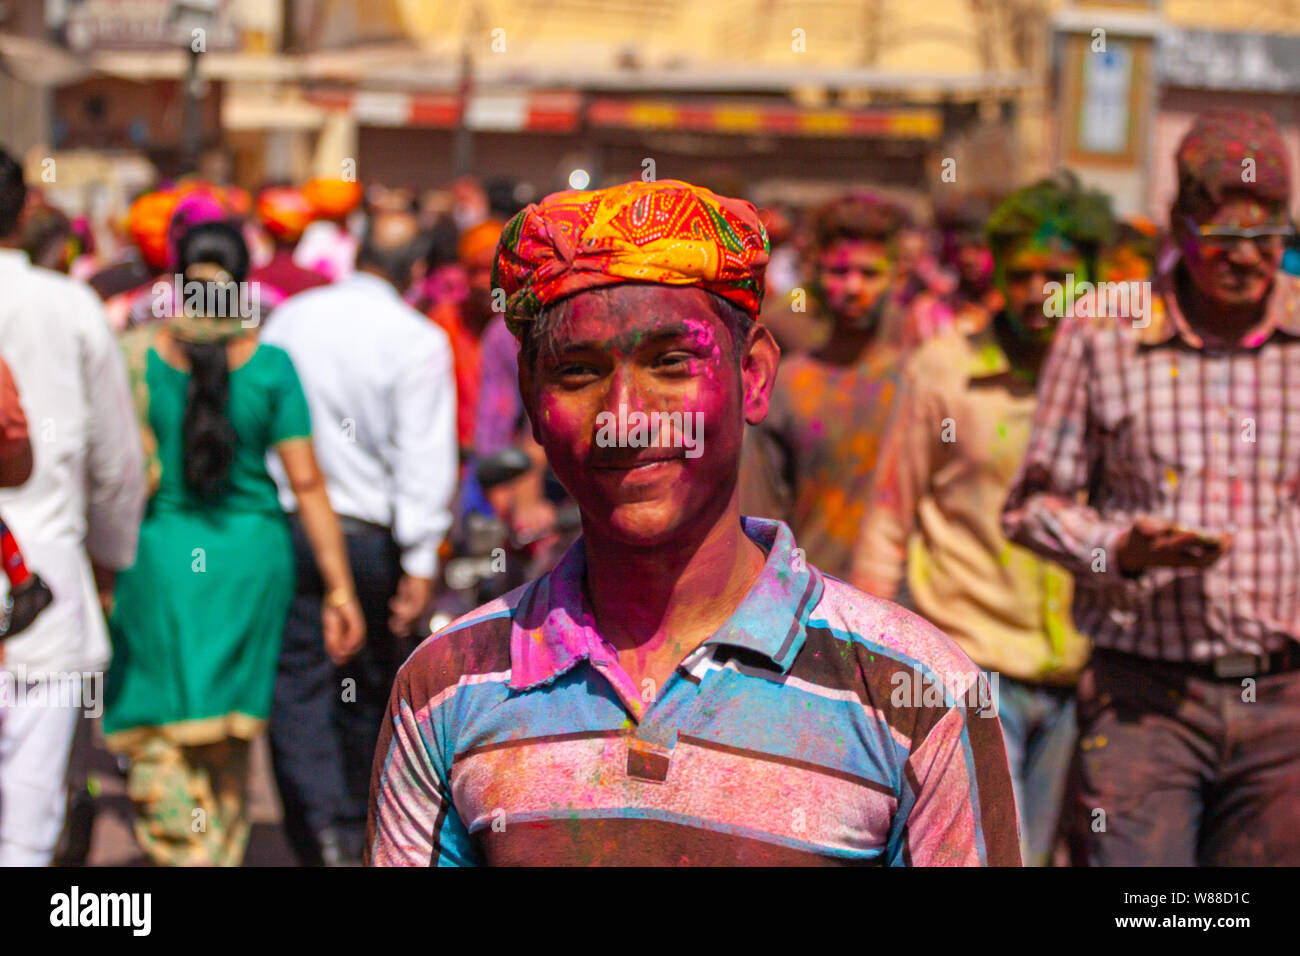 Colorful People at Holi Festival in Jaipur, India Stock Photo